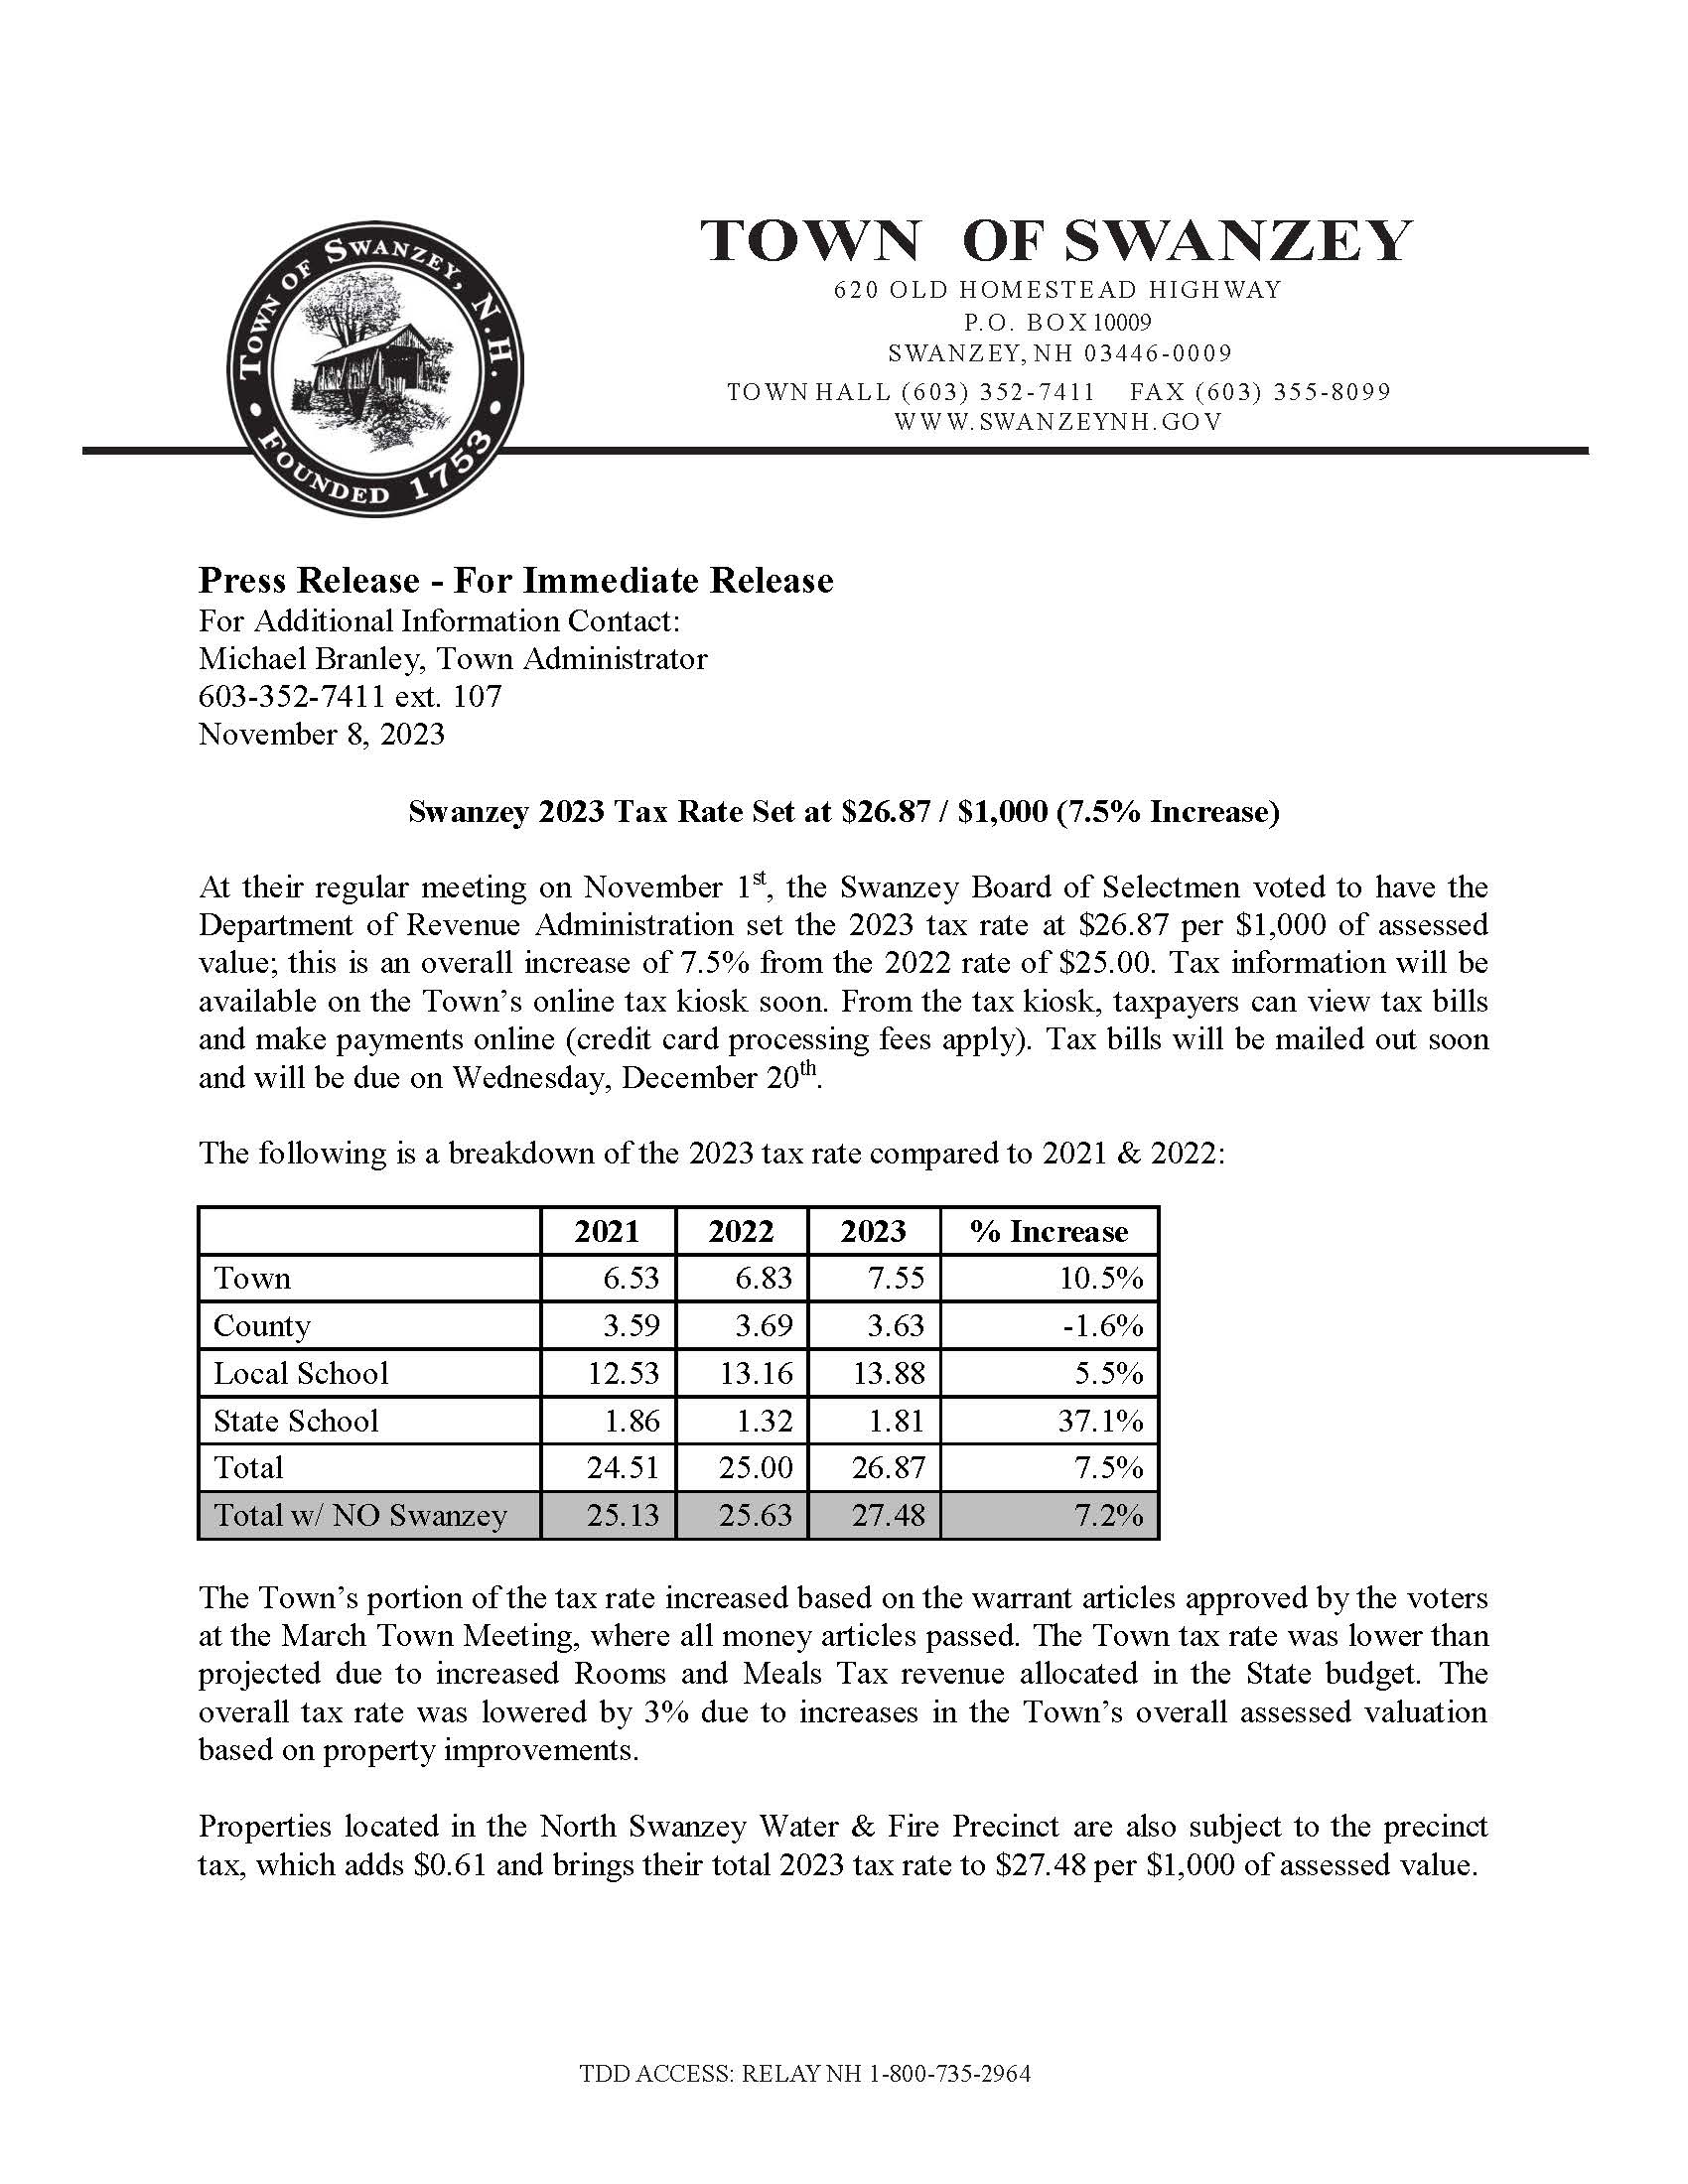 2023-11-8 Press Release re 2023 Tax Rate_Page_1